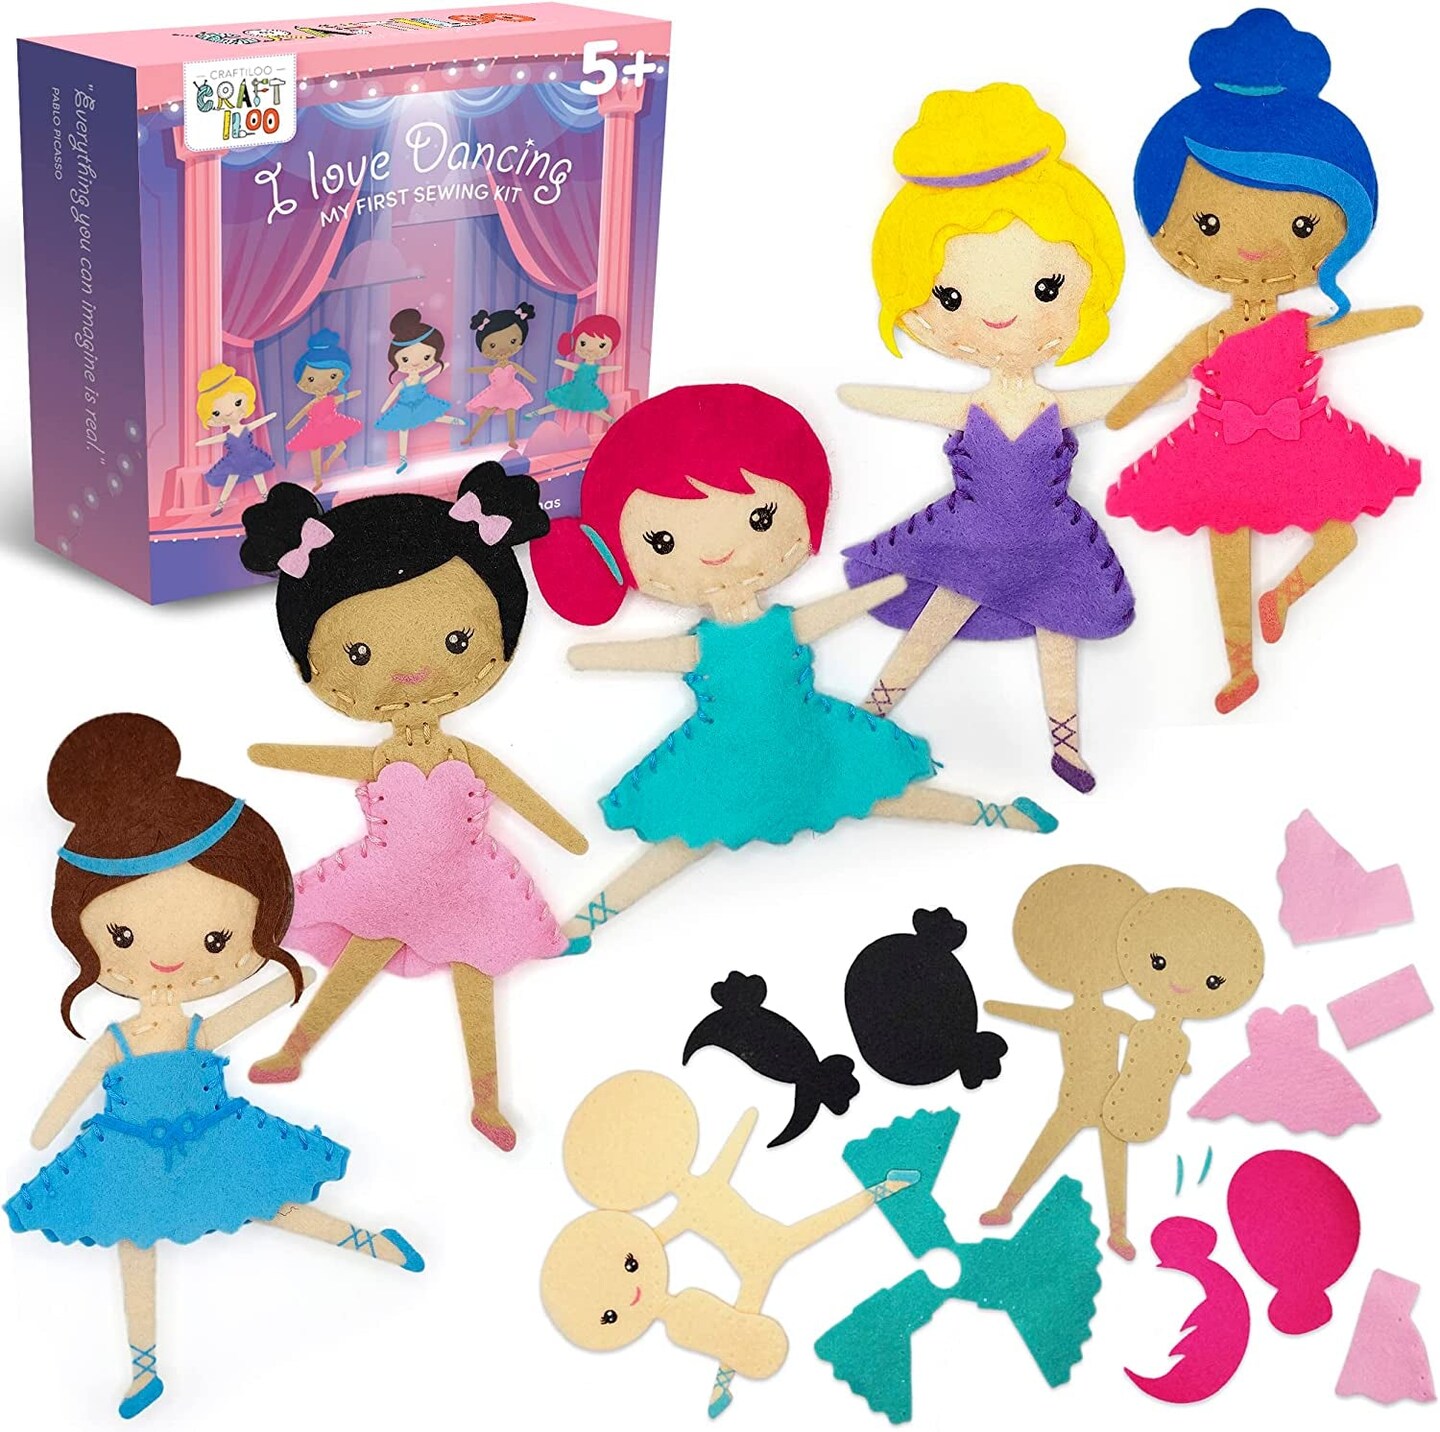 Ballerina Dancers Sewing Kit for Kids, Fun and Educational Craft Set for  Boys and Girls Age 5-12, Sew Your Own Felt Ballerina Craft Kit for Beginners  (Ballerina Kit)